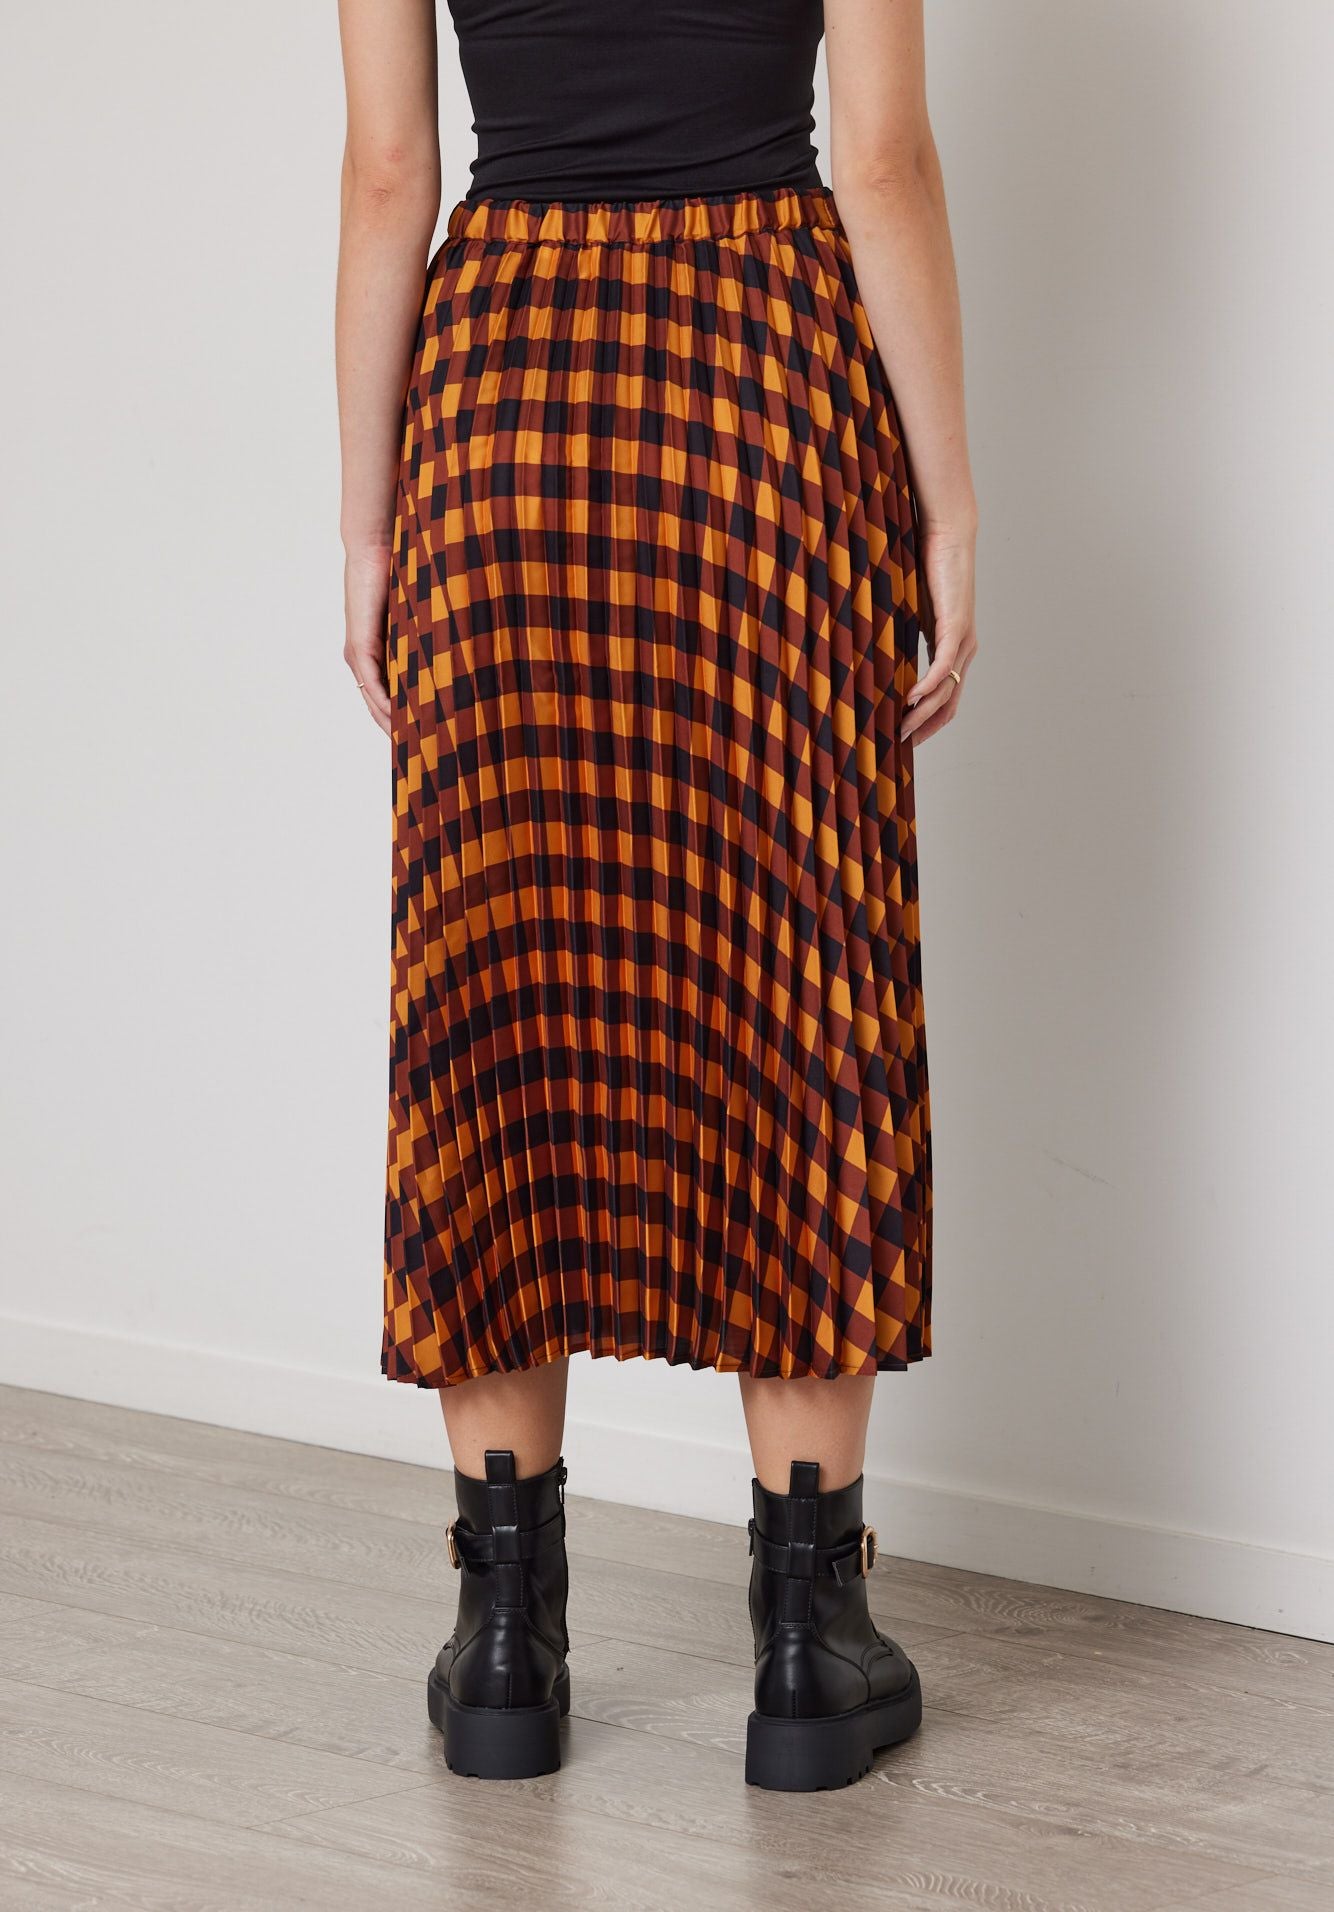 DUO EMBER PLEAT SKIRT - CHECK PRINT - THE VOGUE STORE